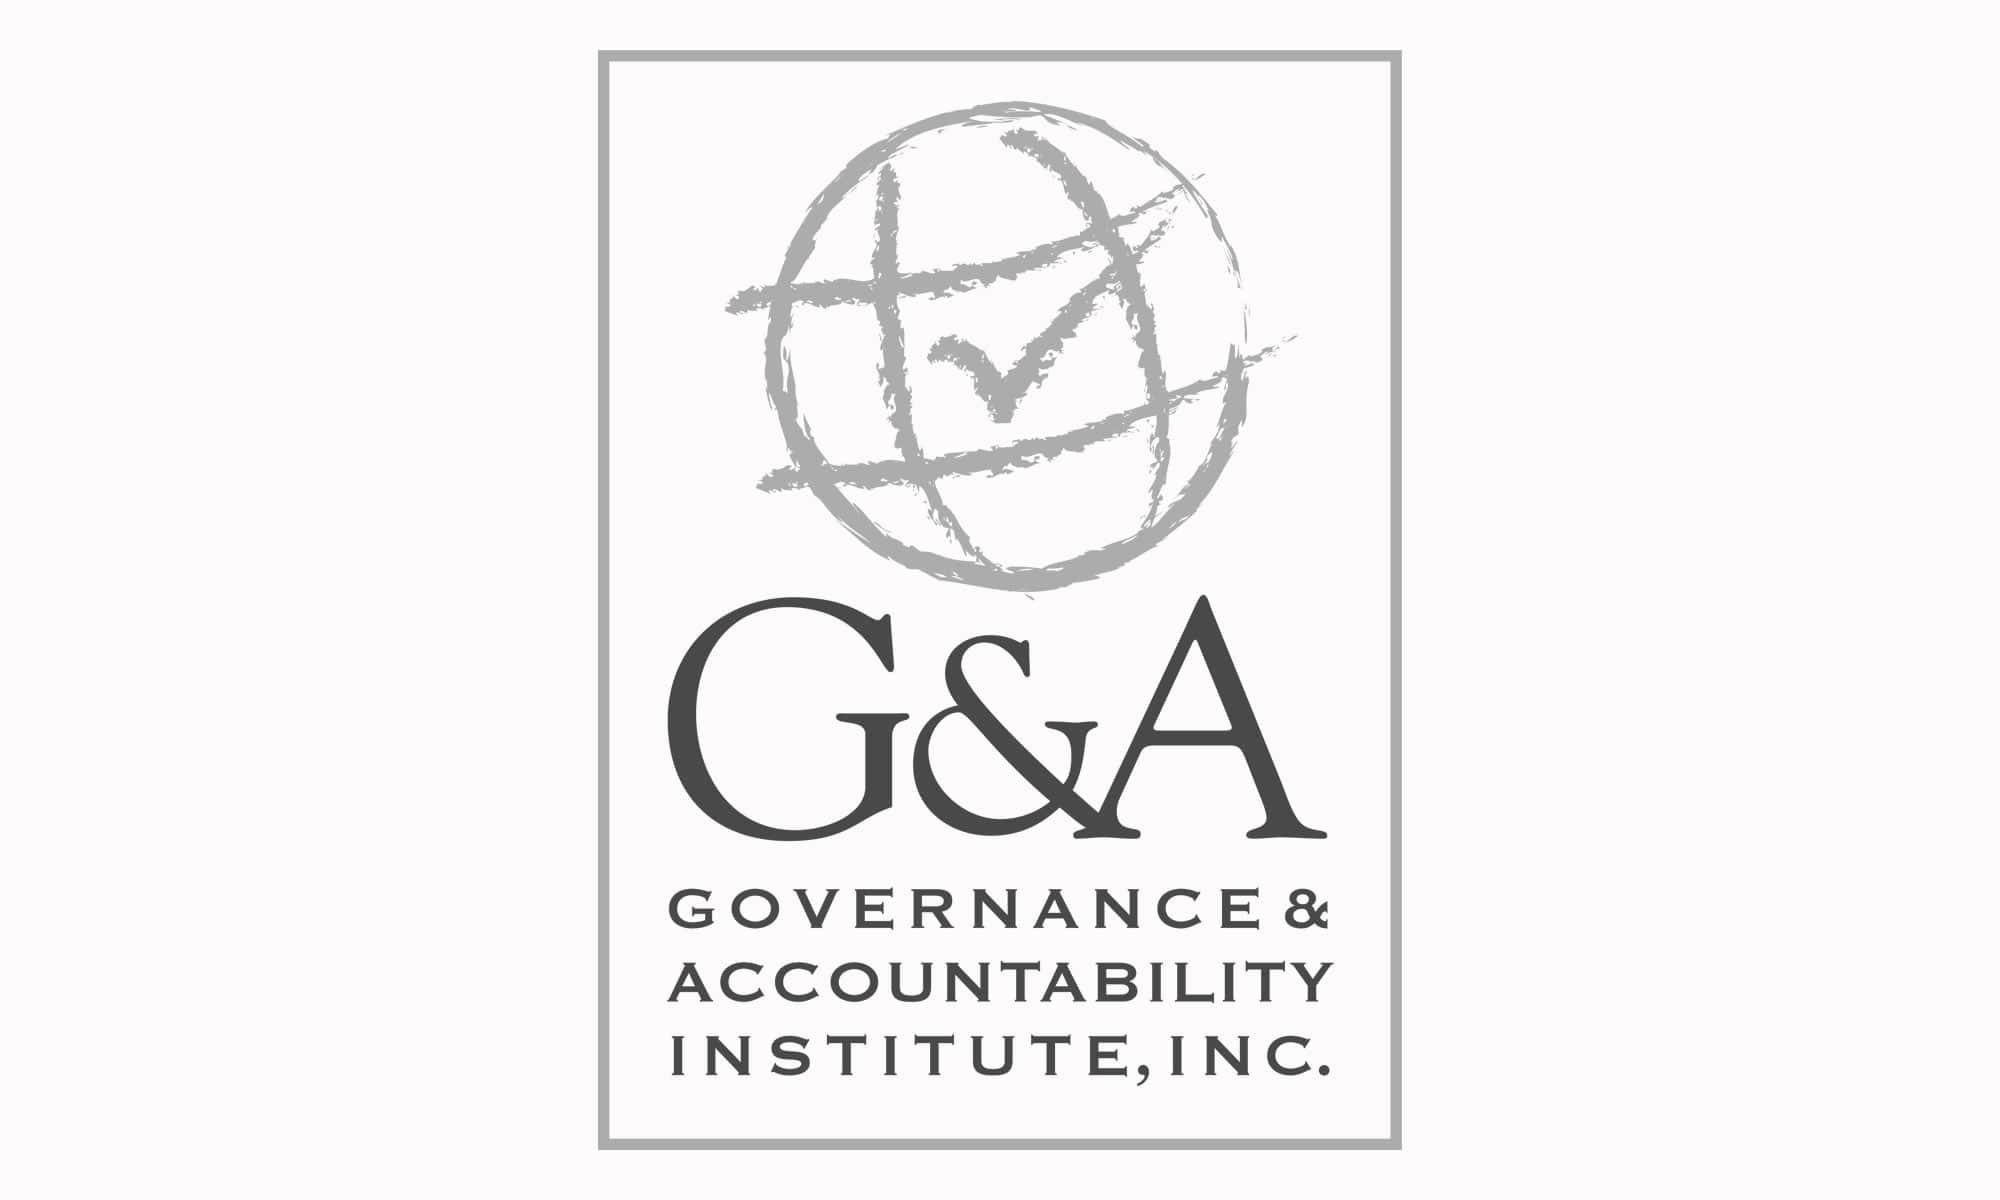 The Governance & Accountability Institute is an ESG and Sustainability consulting firm, founded in 2006, based in NYC, focused on helping clients become leaders in Corporate Sustainability, Responsibility, Citizenship --  including the full breadth of Environmental, Social and Corporate Governance (ESG) issues. 